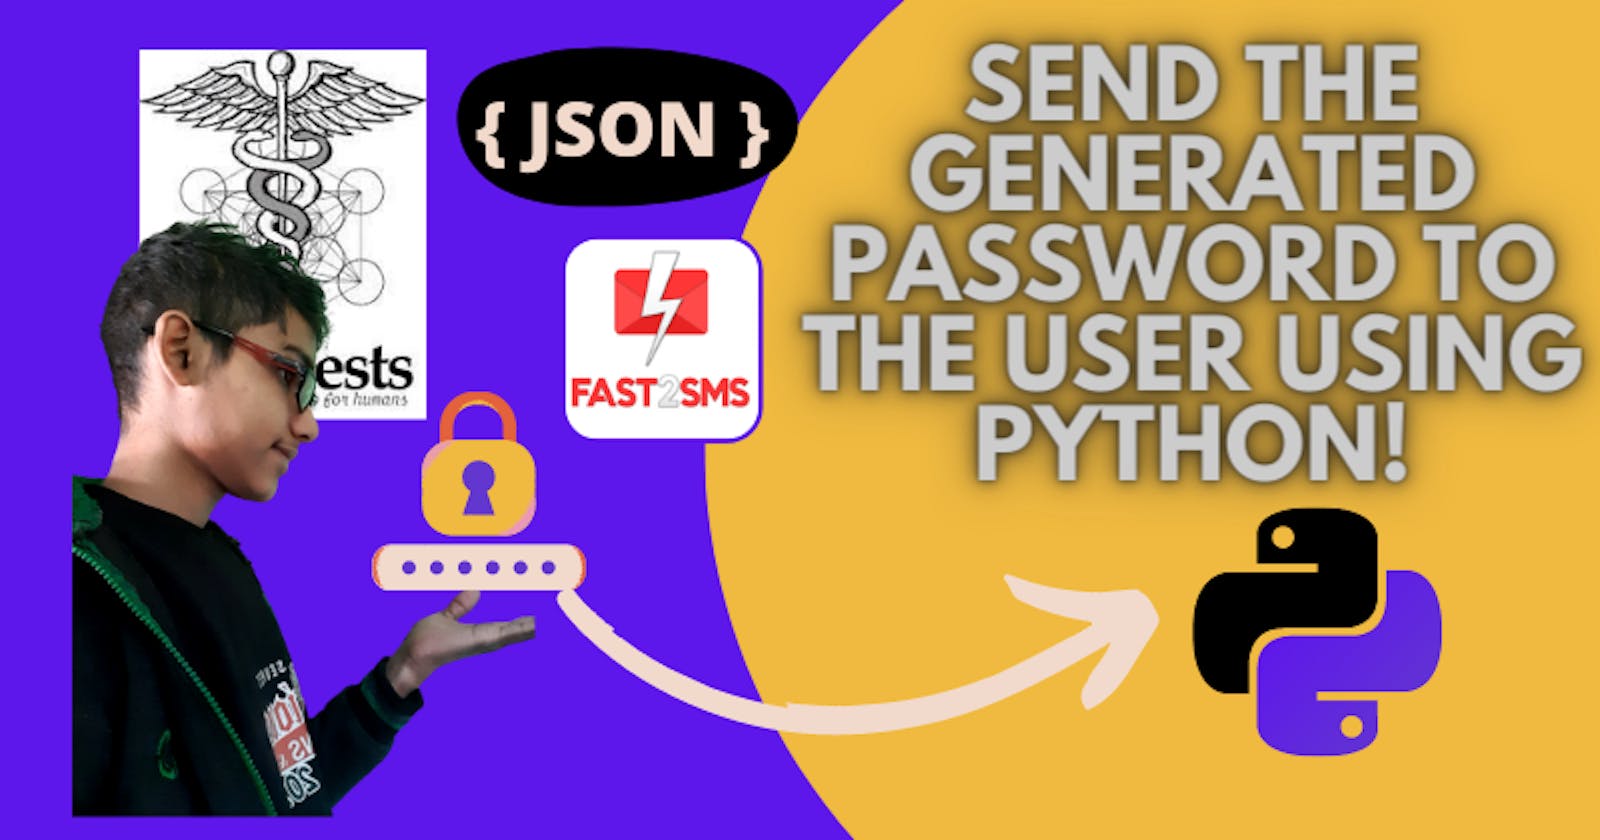 How I ridiculously Message the "random generated password" to the  User's Mobile Number using python?